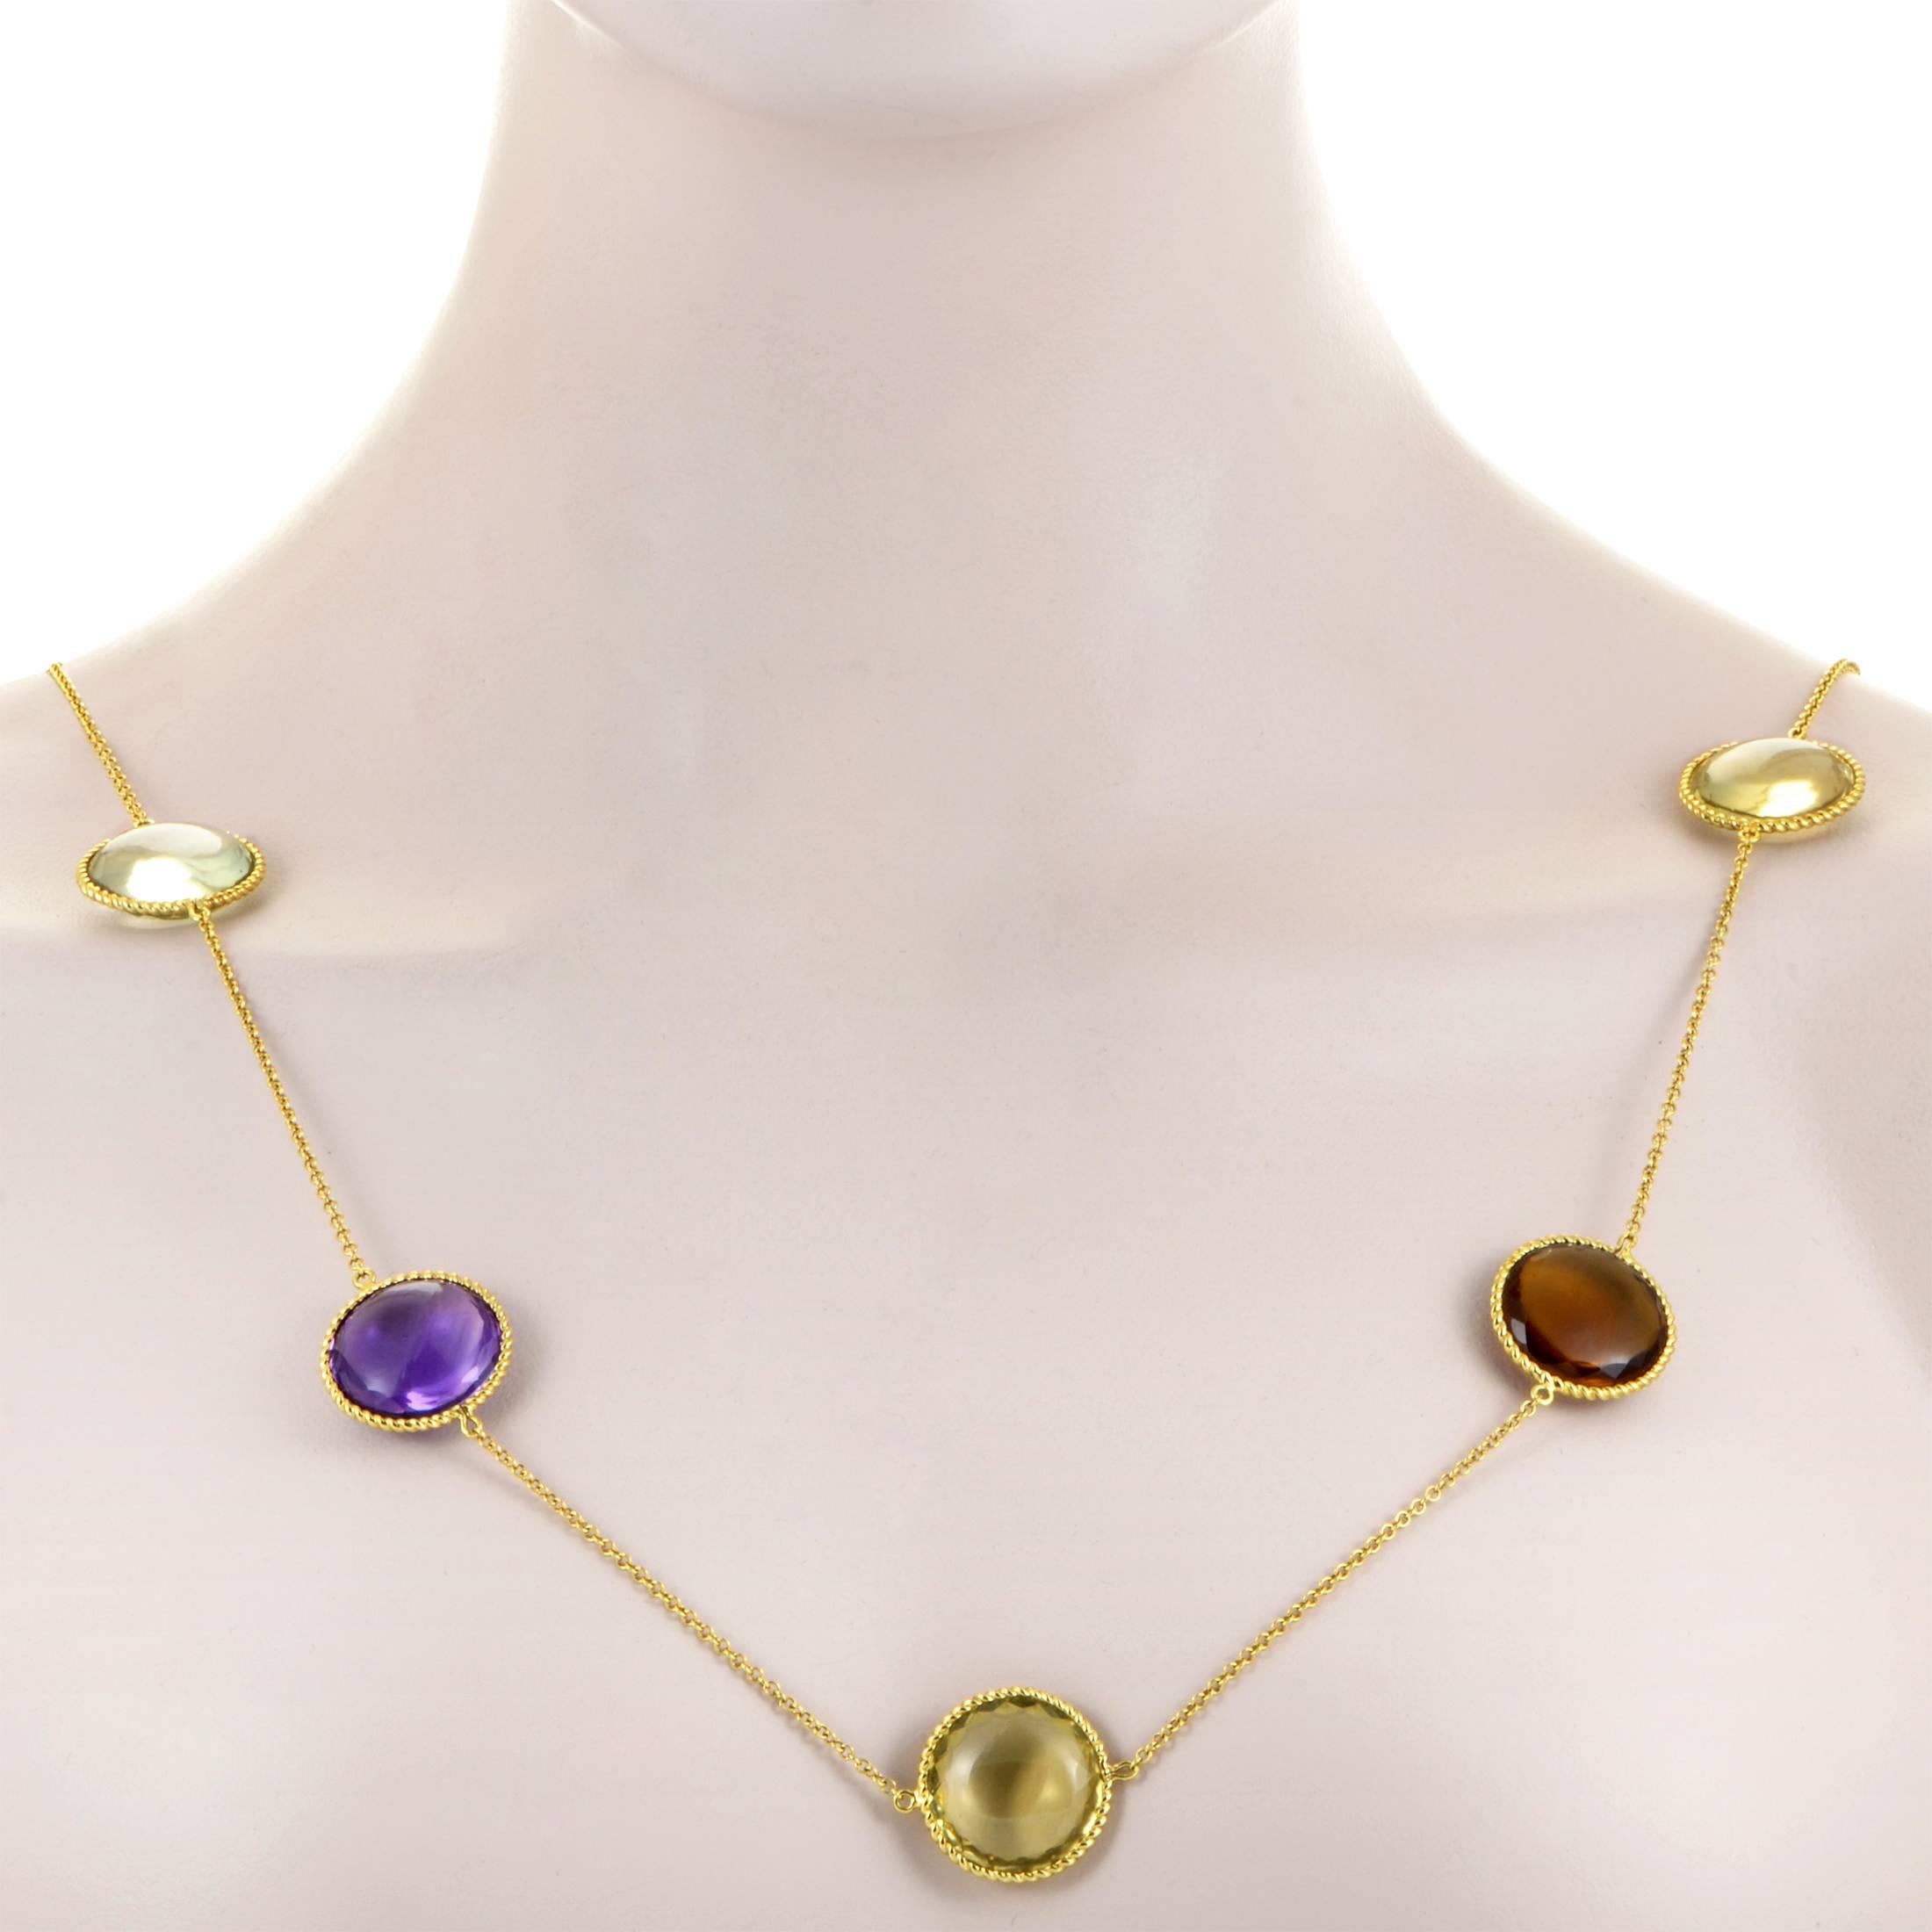 A gorgeous array of passionate semi-precious gemstones takes center stage in this lovely design from Roberto Coin's Ipanmea collection. Smoky topaz, amethyst, topaz, and citrine stones set in 18K yellow gold provide a gorgeous design for any lady.